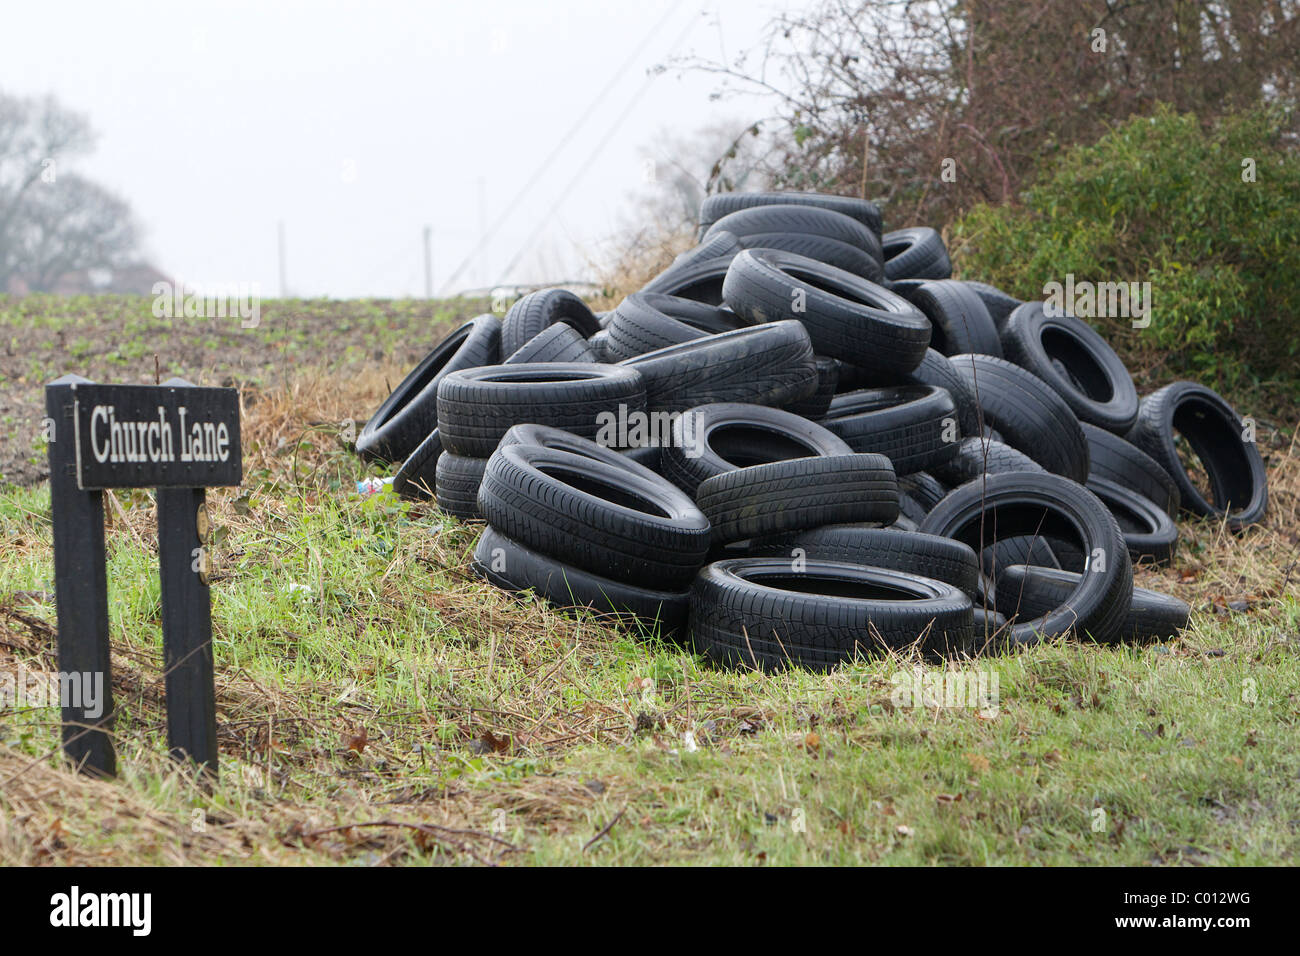 A pile of tyres dumped beside a countryside road in West Yorkshire, United Kingdom. Stock Photo